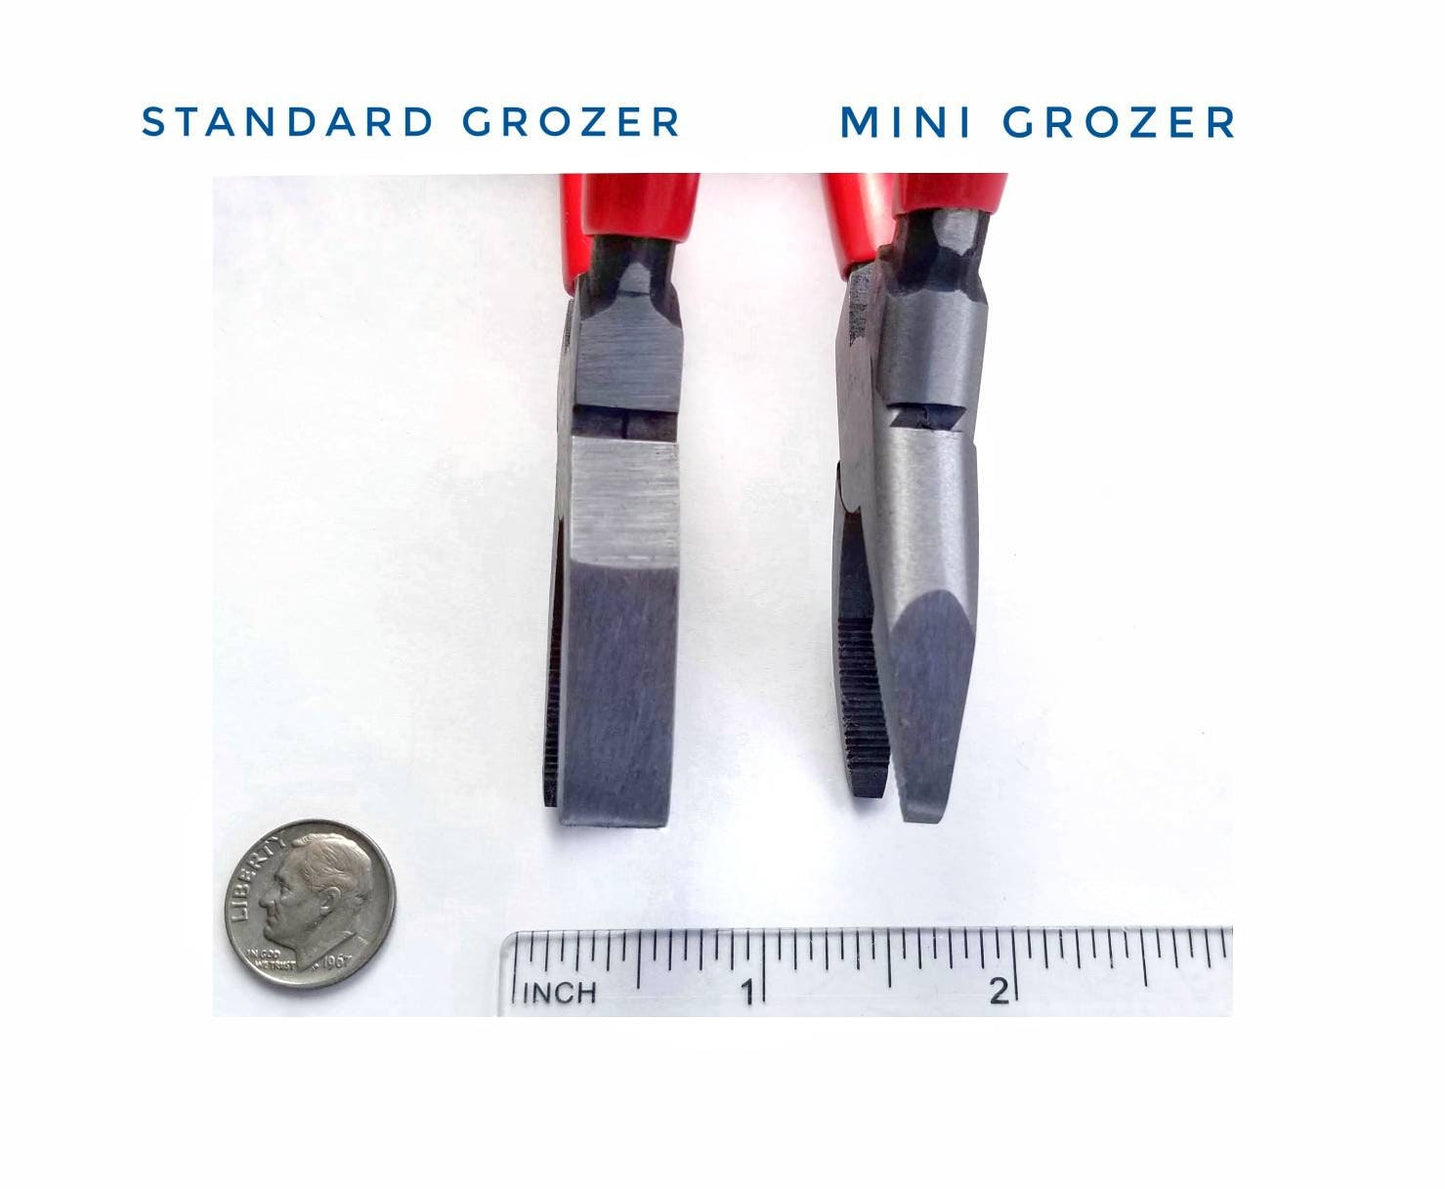 Pliers, Mini Grozziers for Stained Glass. Nip sheet glass or tile into shape. Fits in hand comfortably. All purpose plier, serrated jaw.